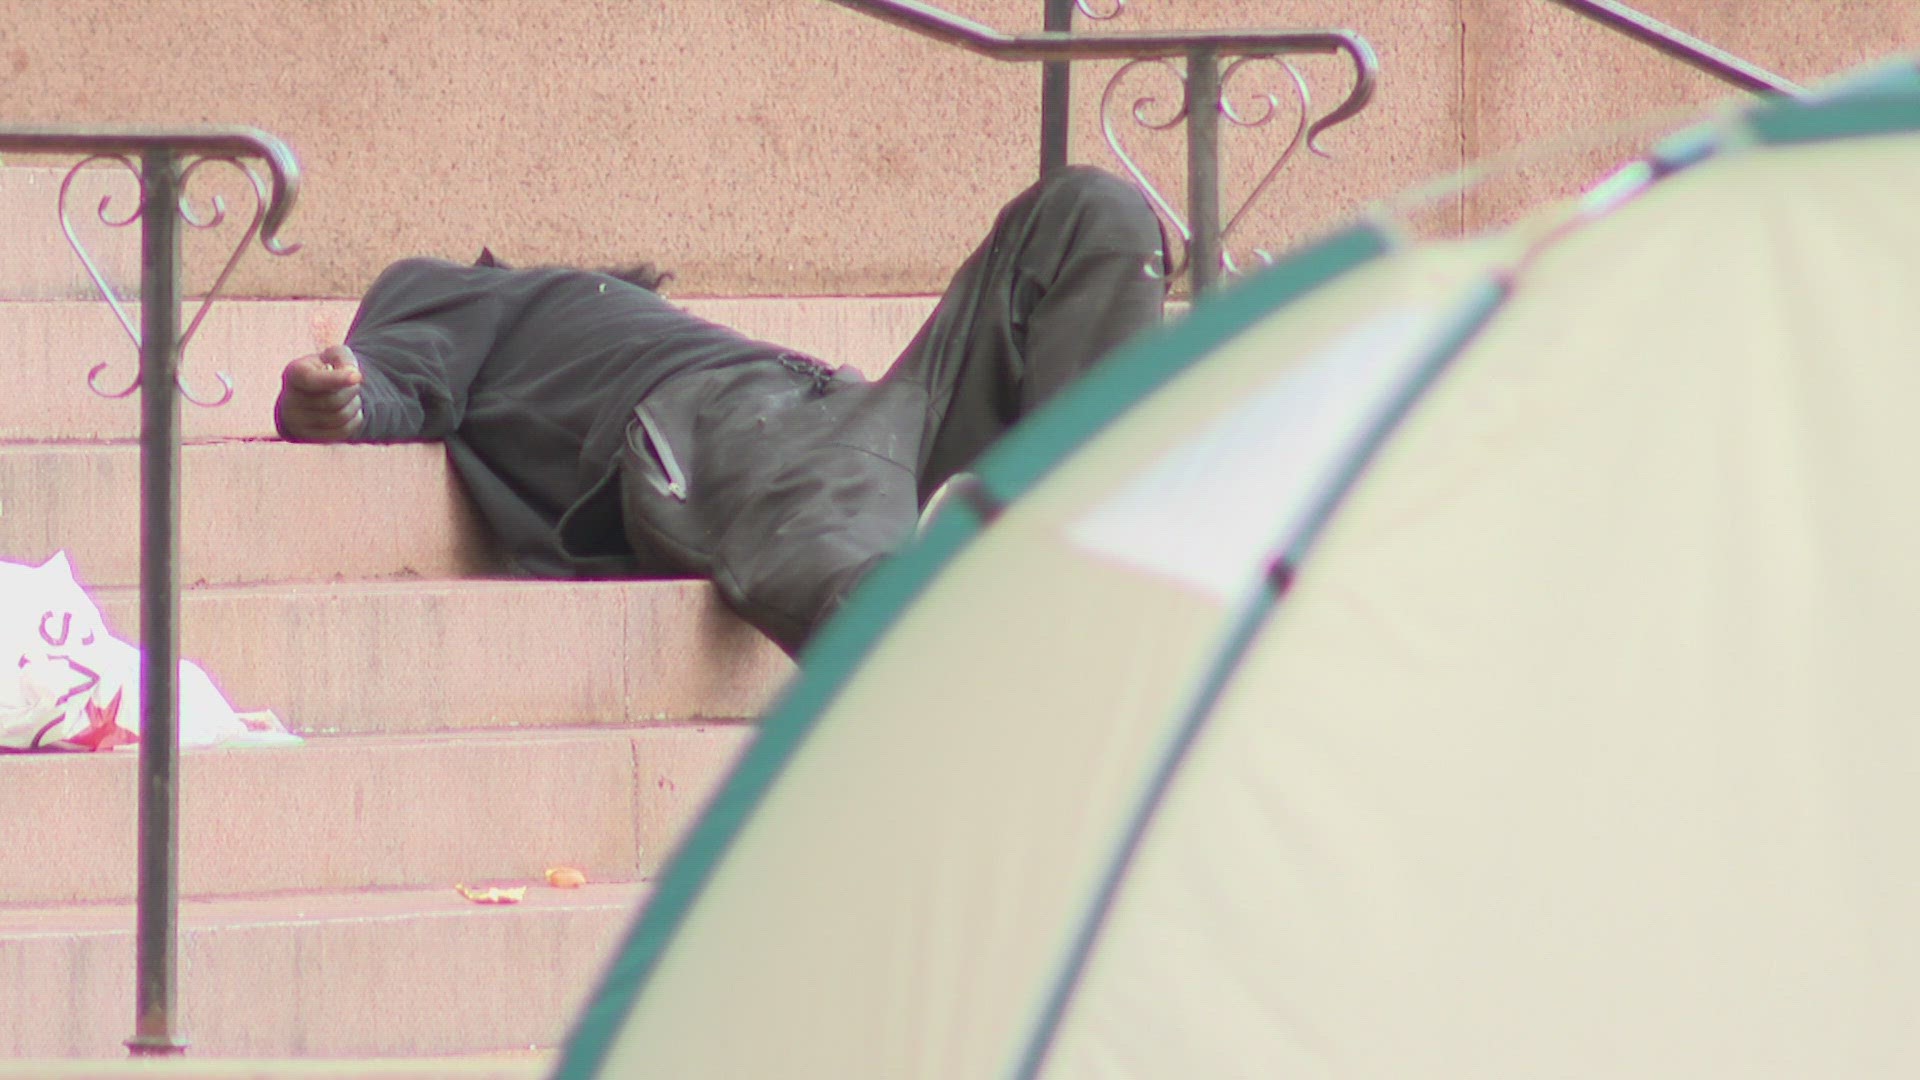 There are more tents popping up outside St. Louis City Hall. Here is what the city is doing about it.